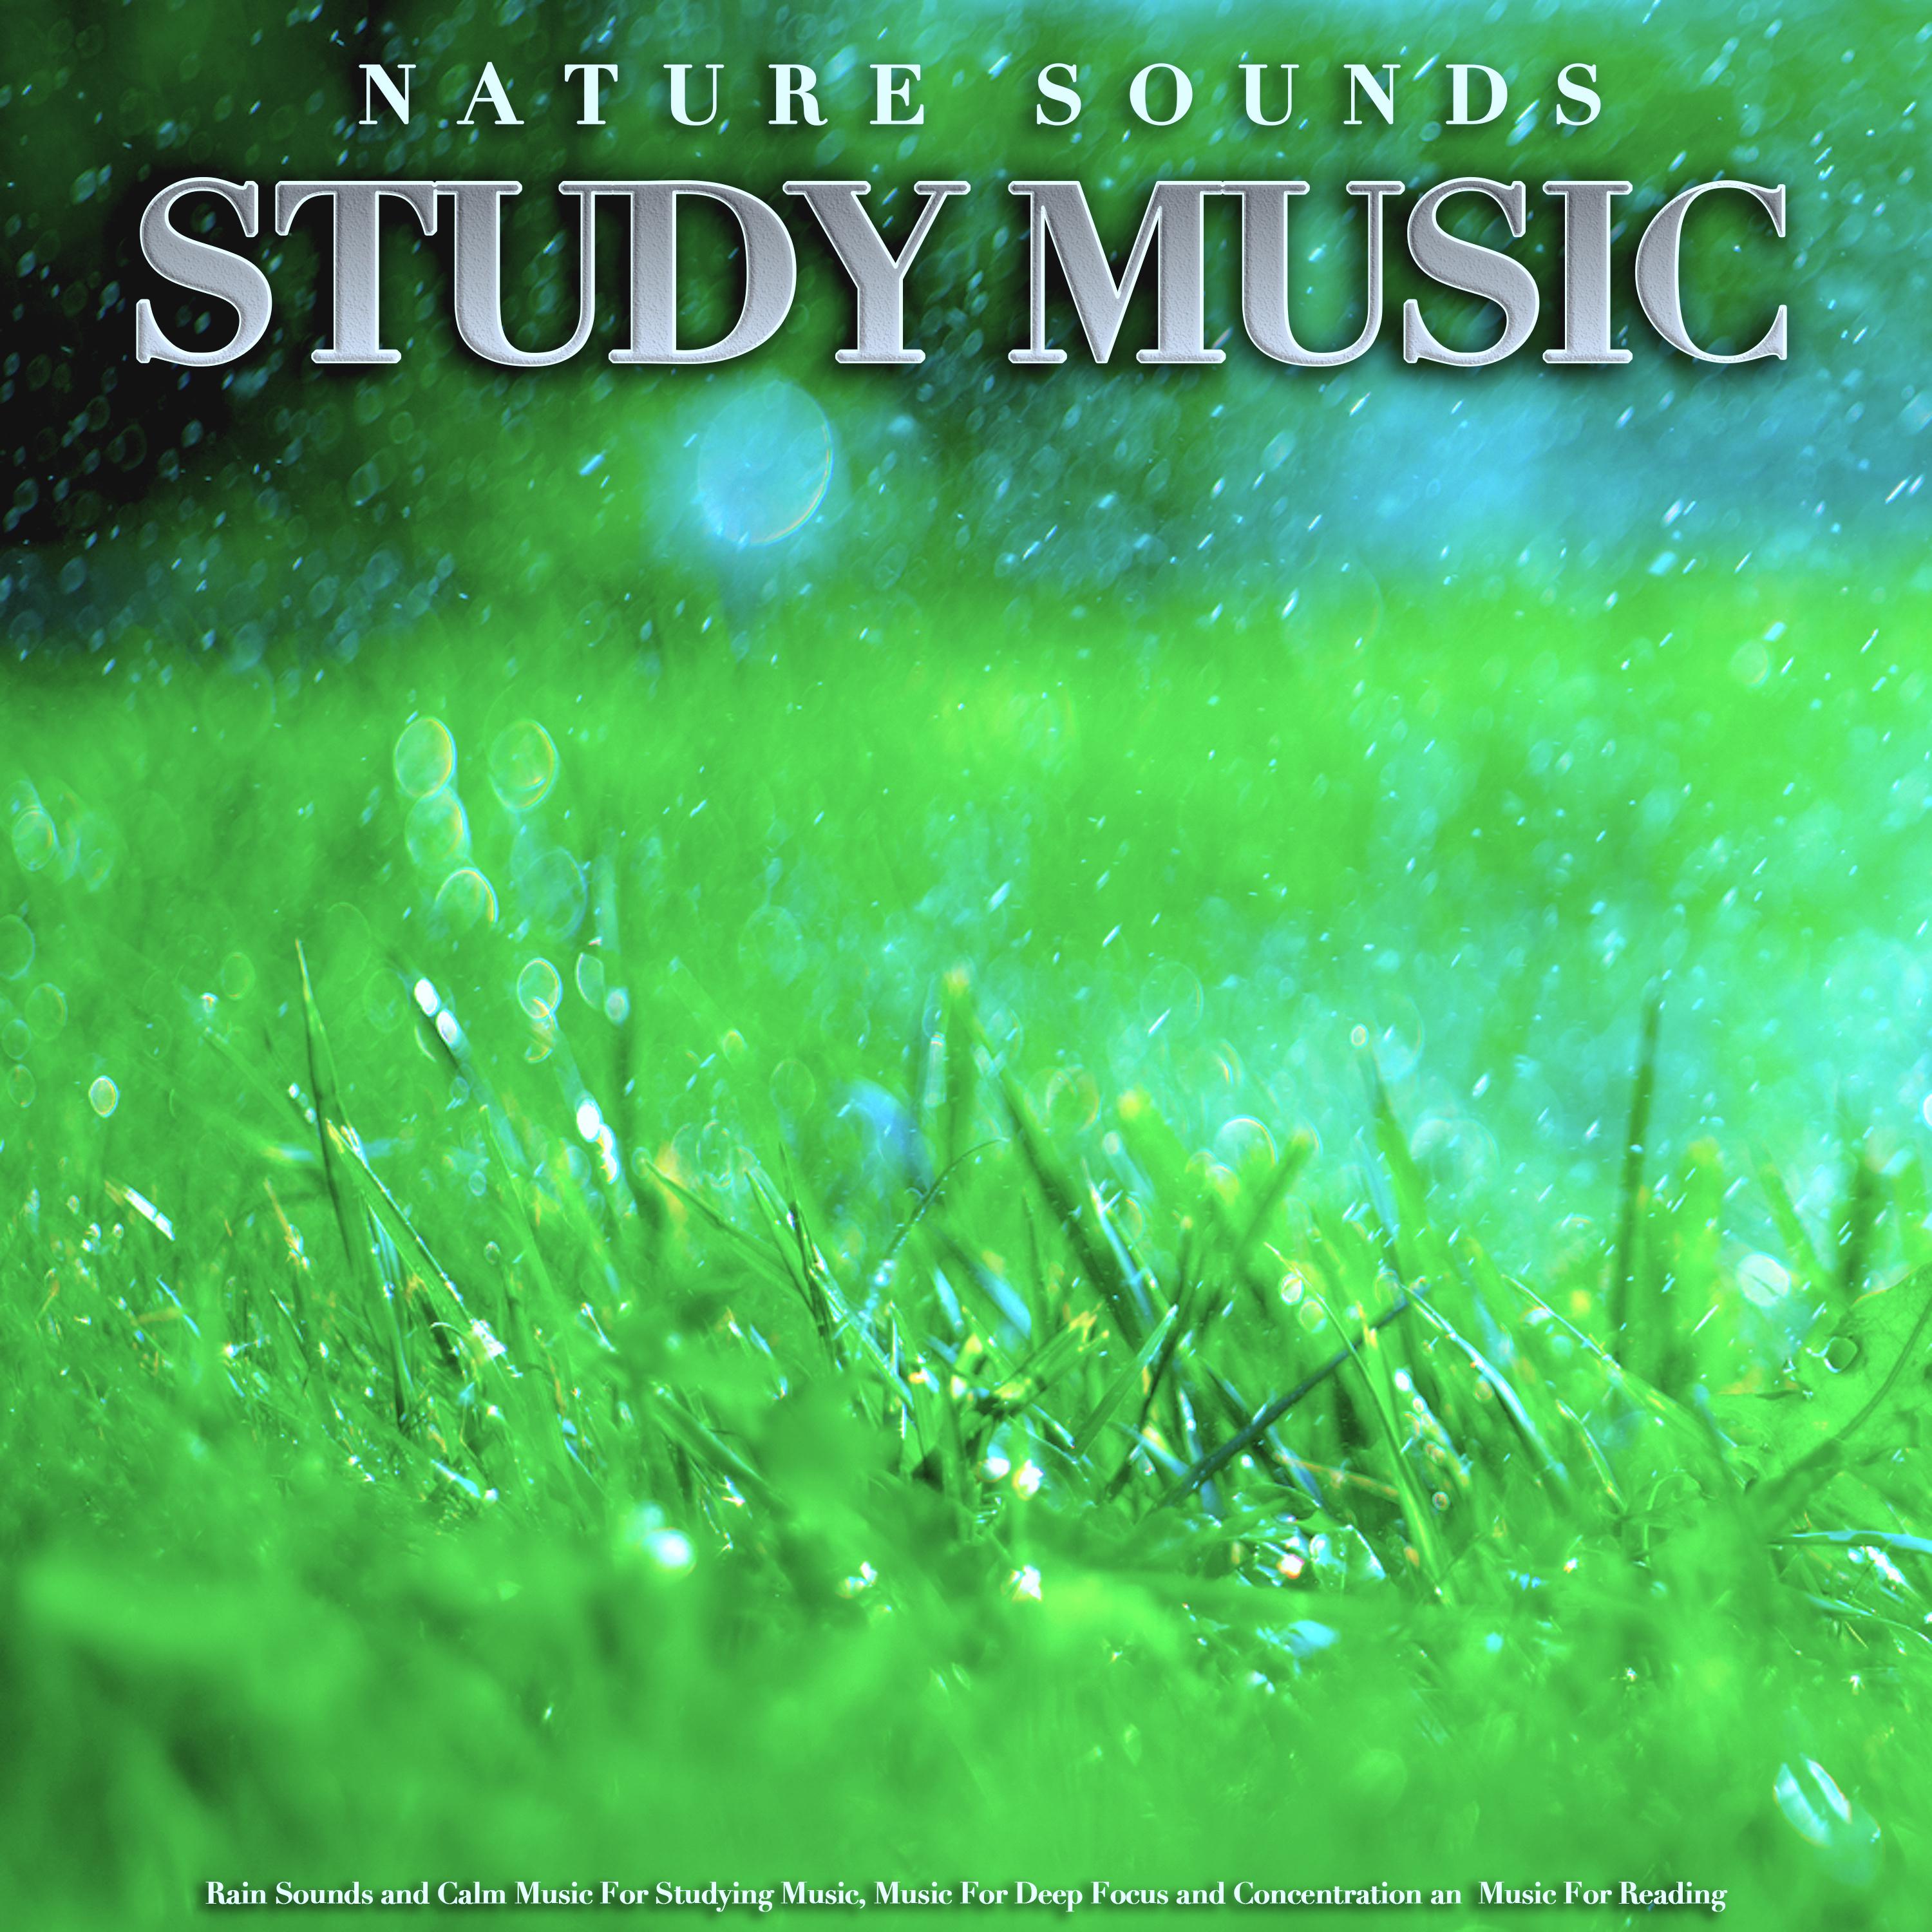 Music For Focus and Concentration With Rain Sounds